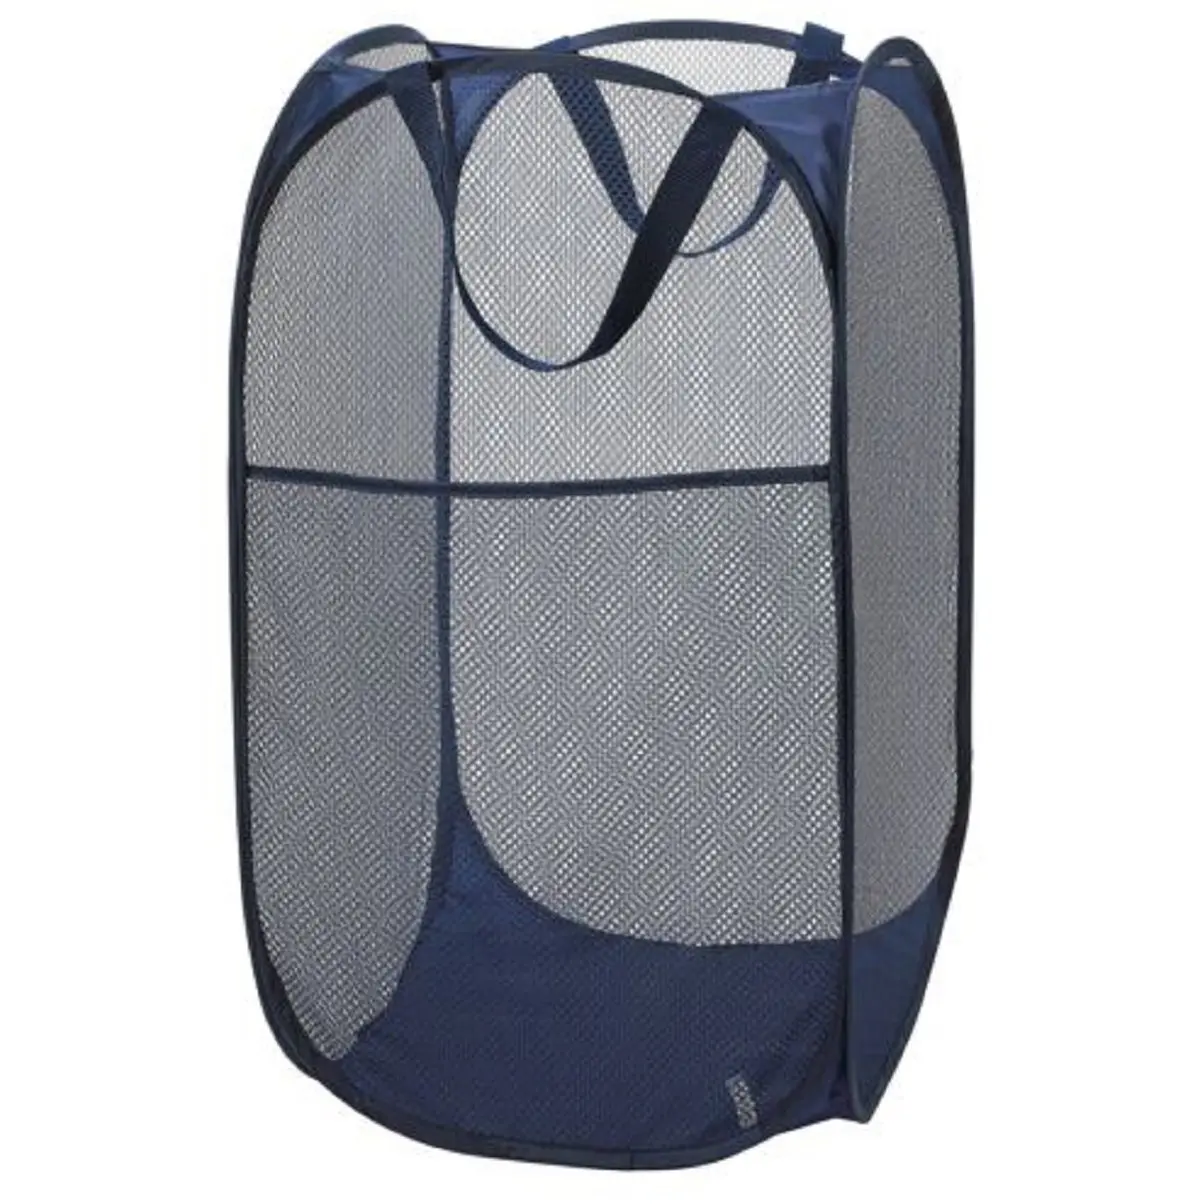 Buy Strong Mesh Pop-up Laundry Hamper, Quality Laundry Basket with ...